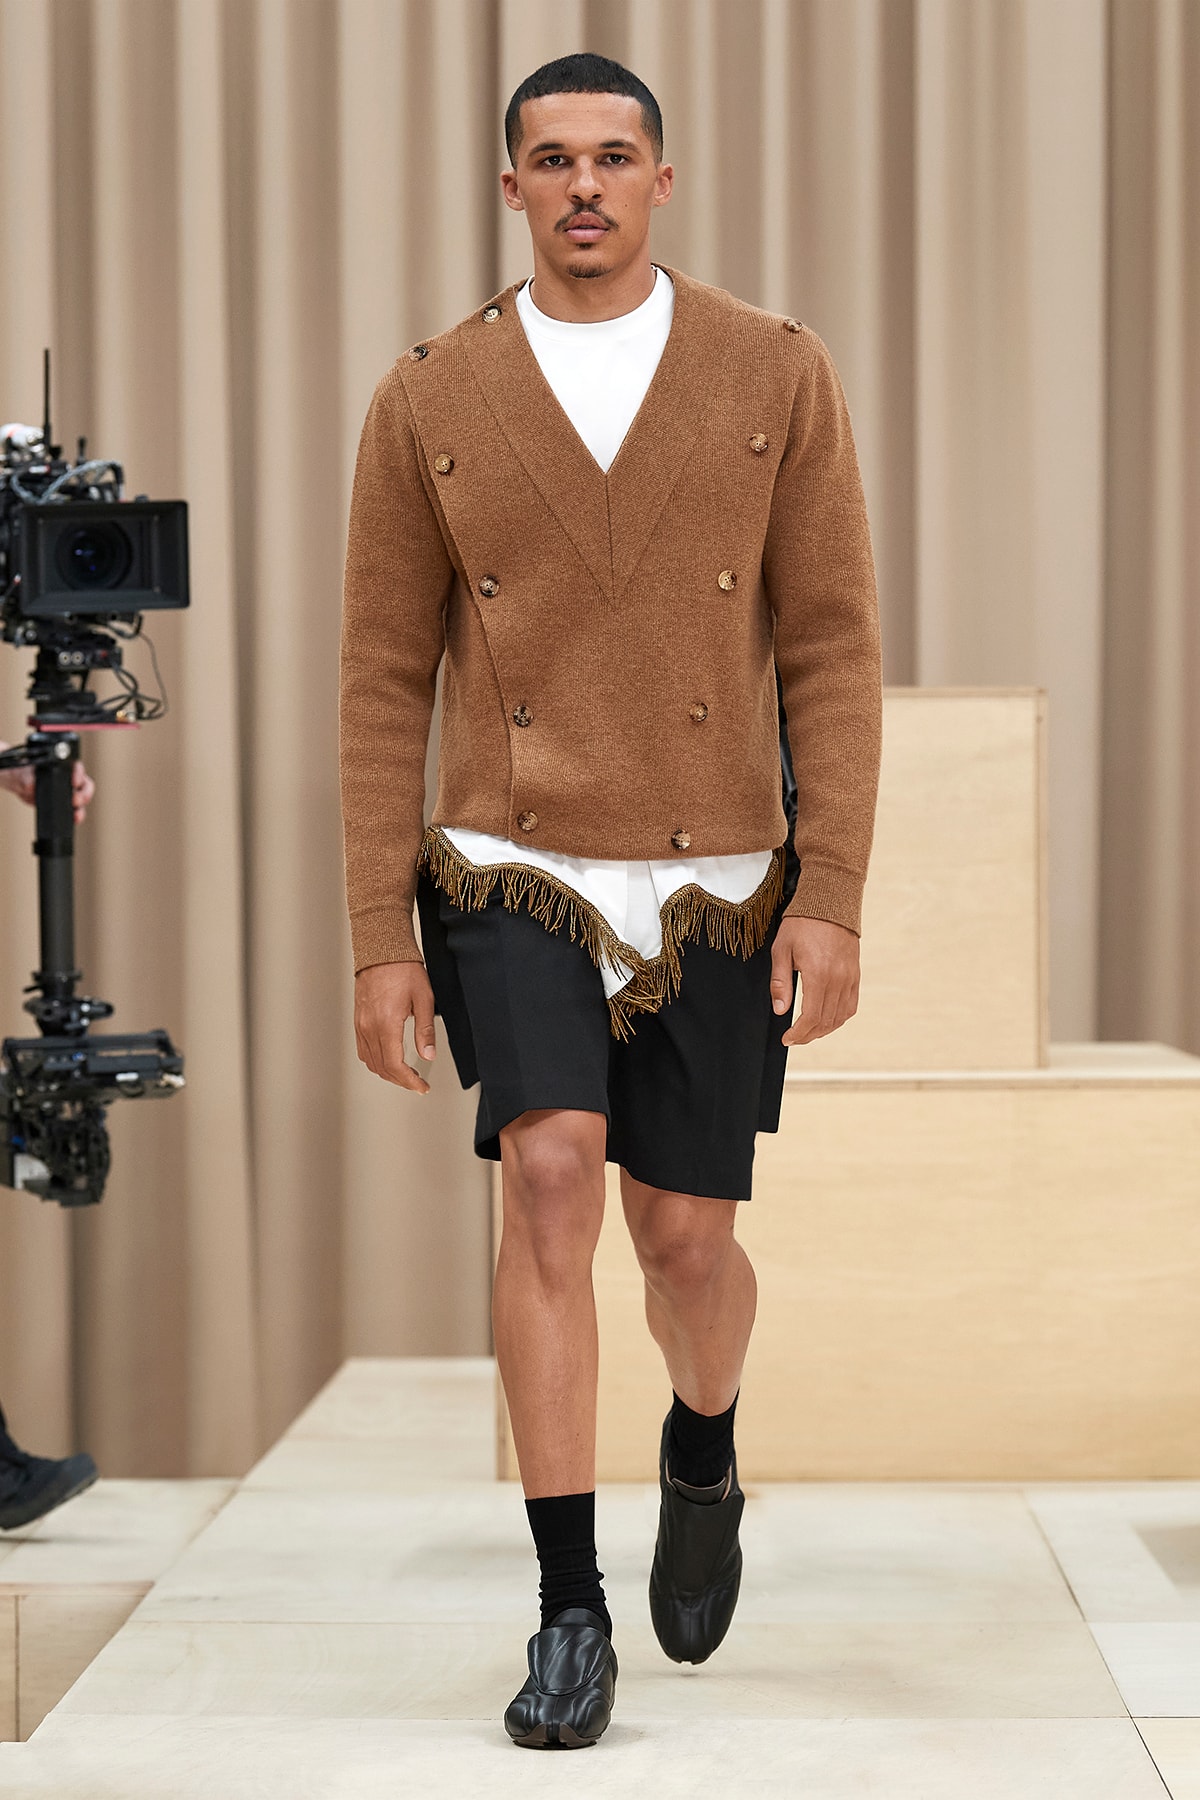 Burberry Fall/Winter 2021 Mens Escapes Show Collection Riccardo Tisci Varsity Jacket